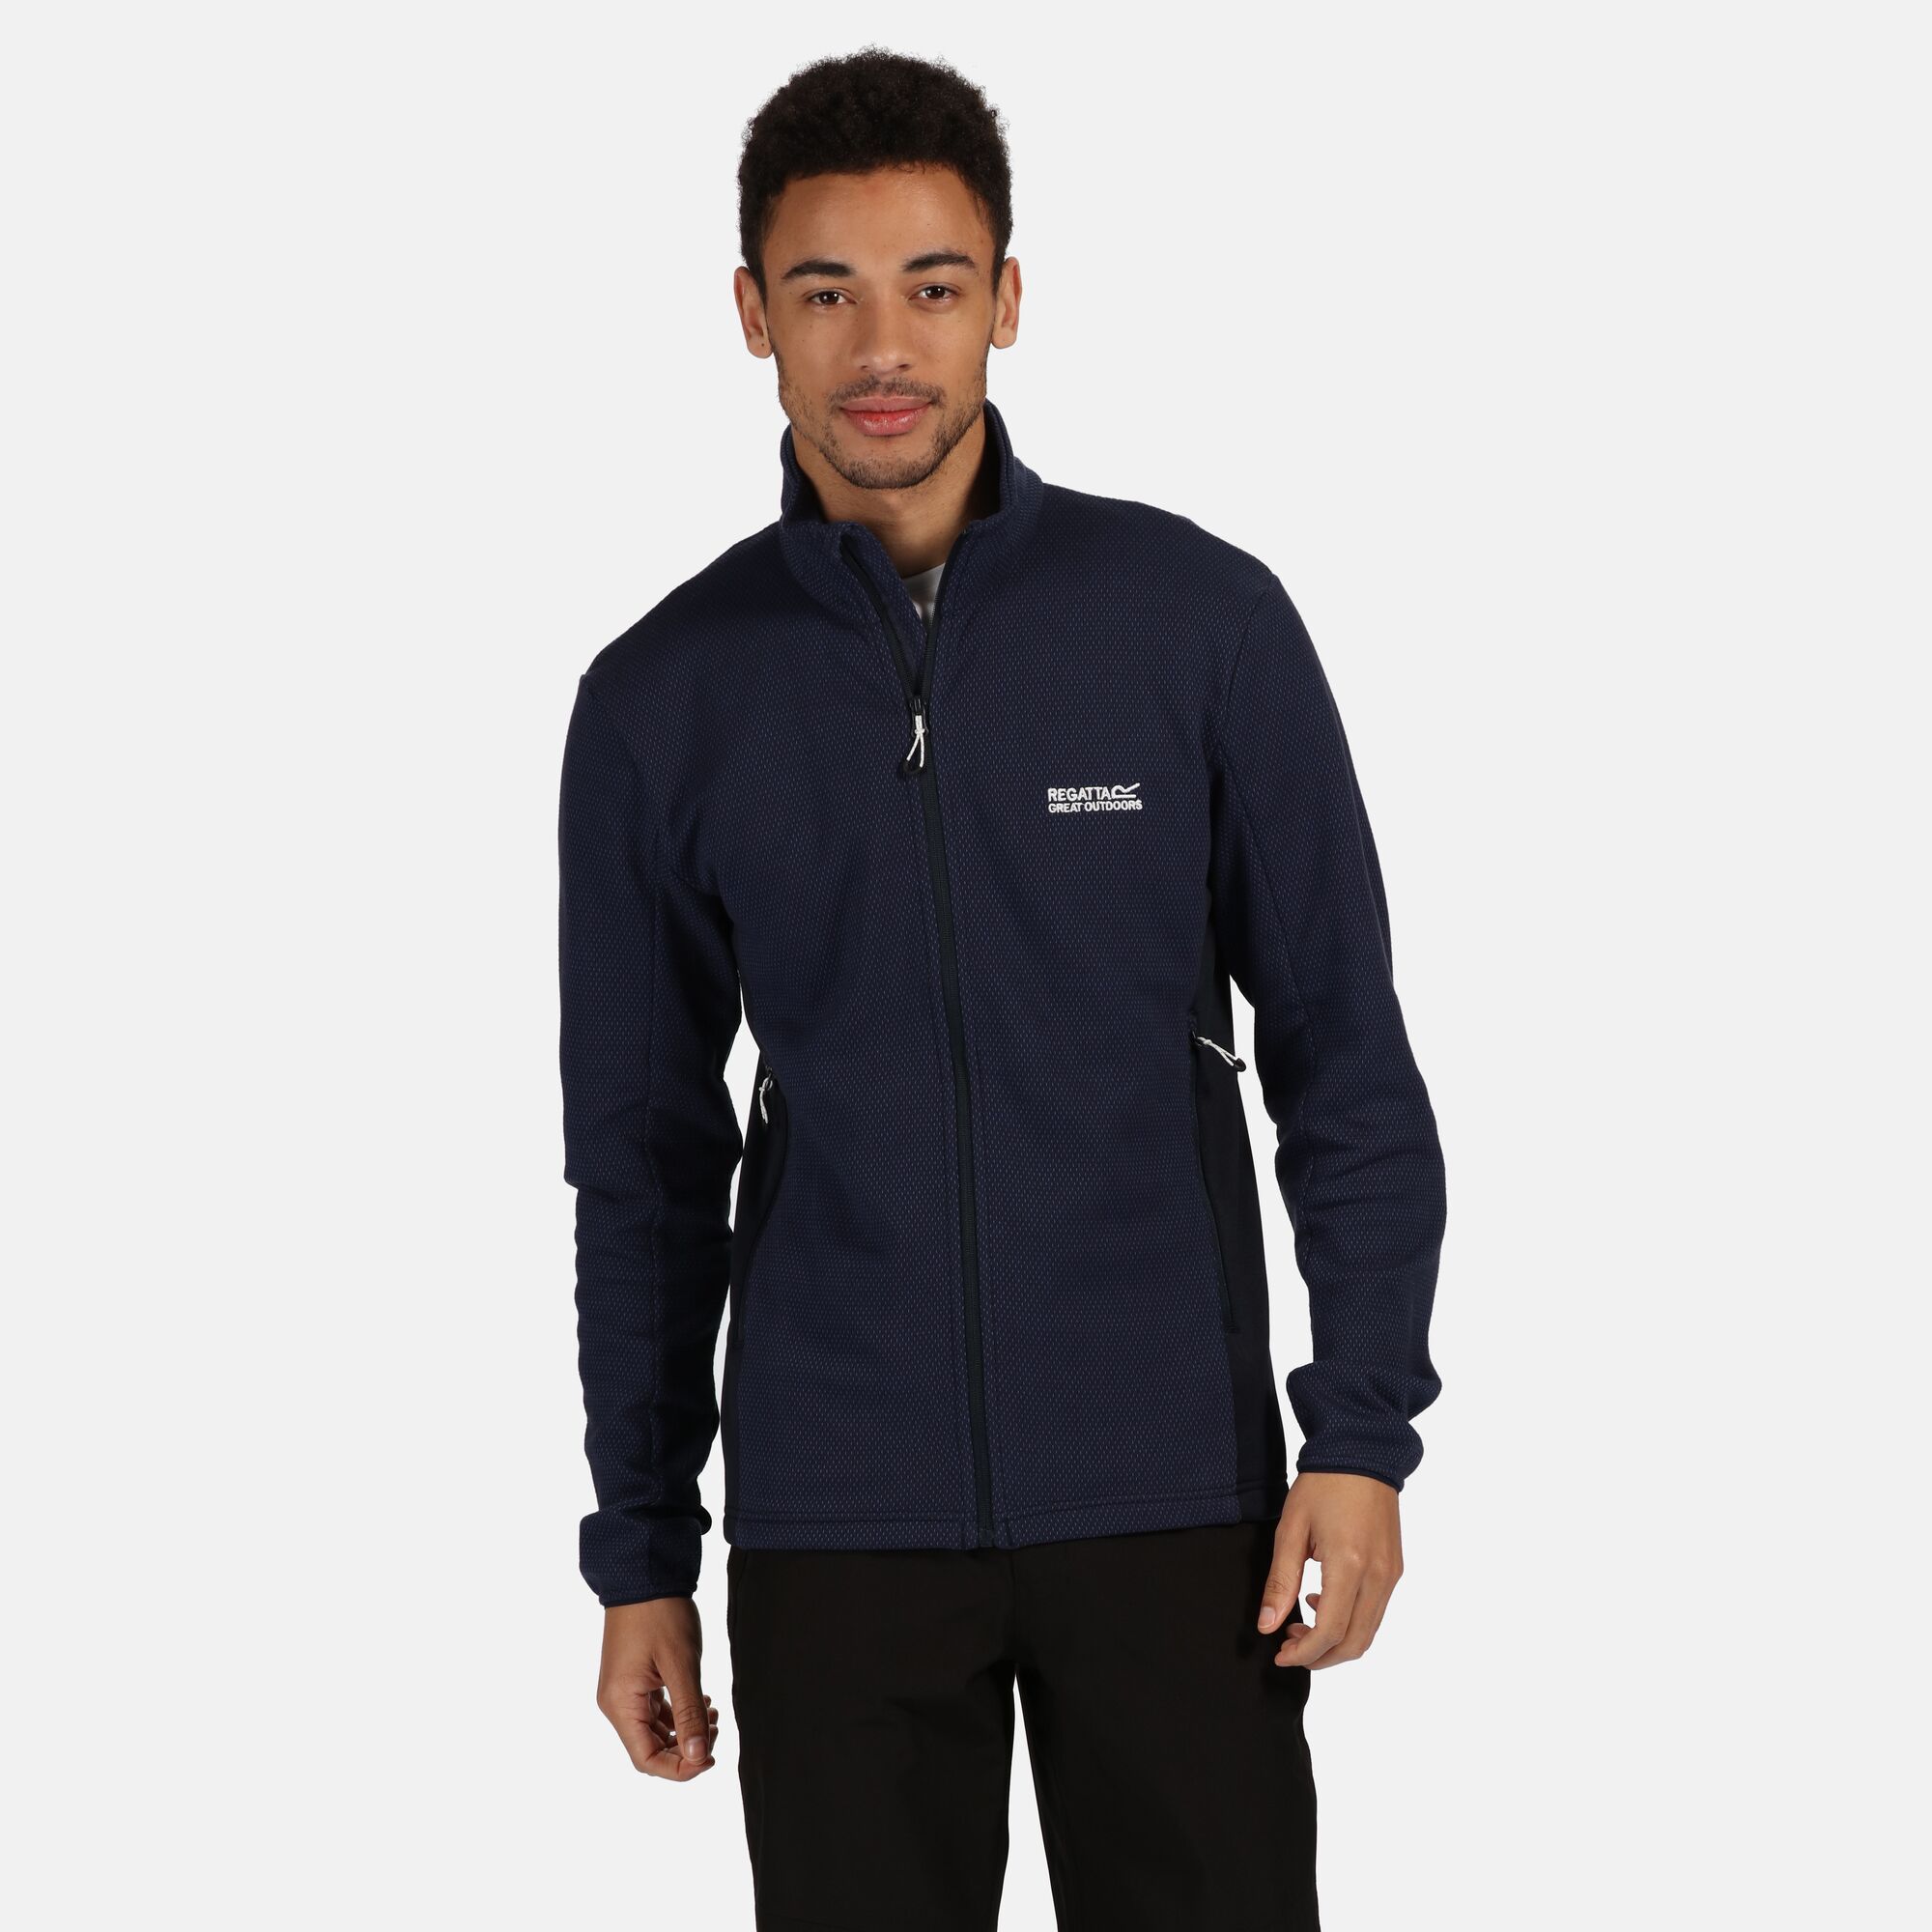 Material: 74% Cotton, 26% Polyester. Two-tone cotton blend fleece (230gsm) with Extol stretch side panels. Breeze blocking stand collar. Features 2 lower zipped pockets. Regatta logo embroidery on the chest.